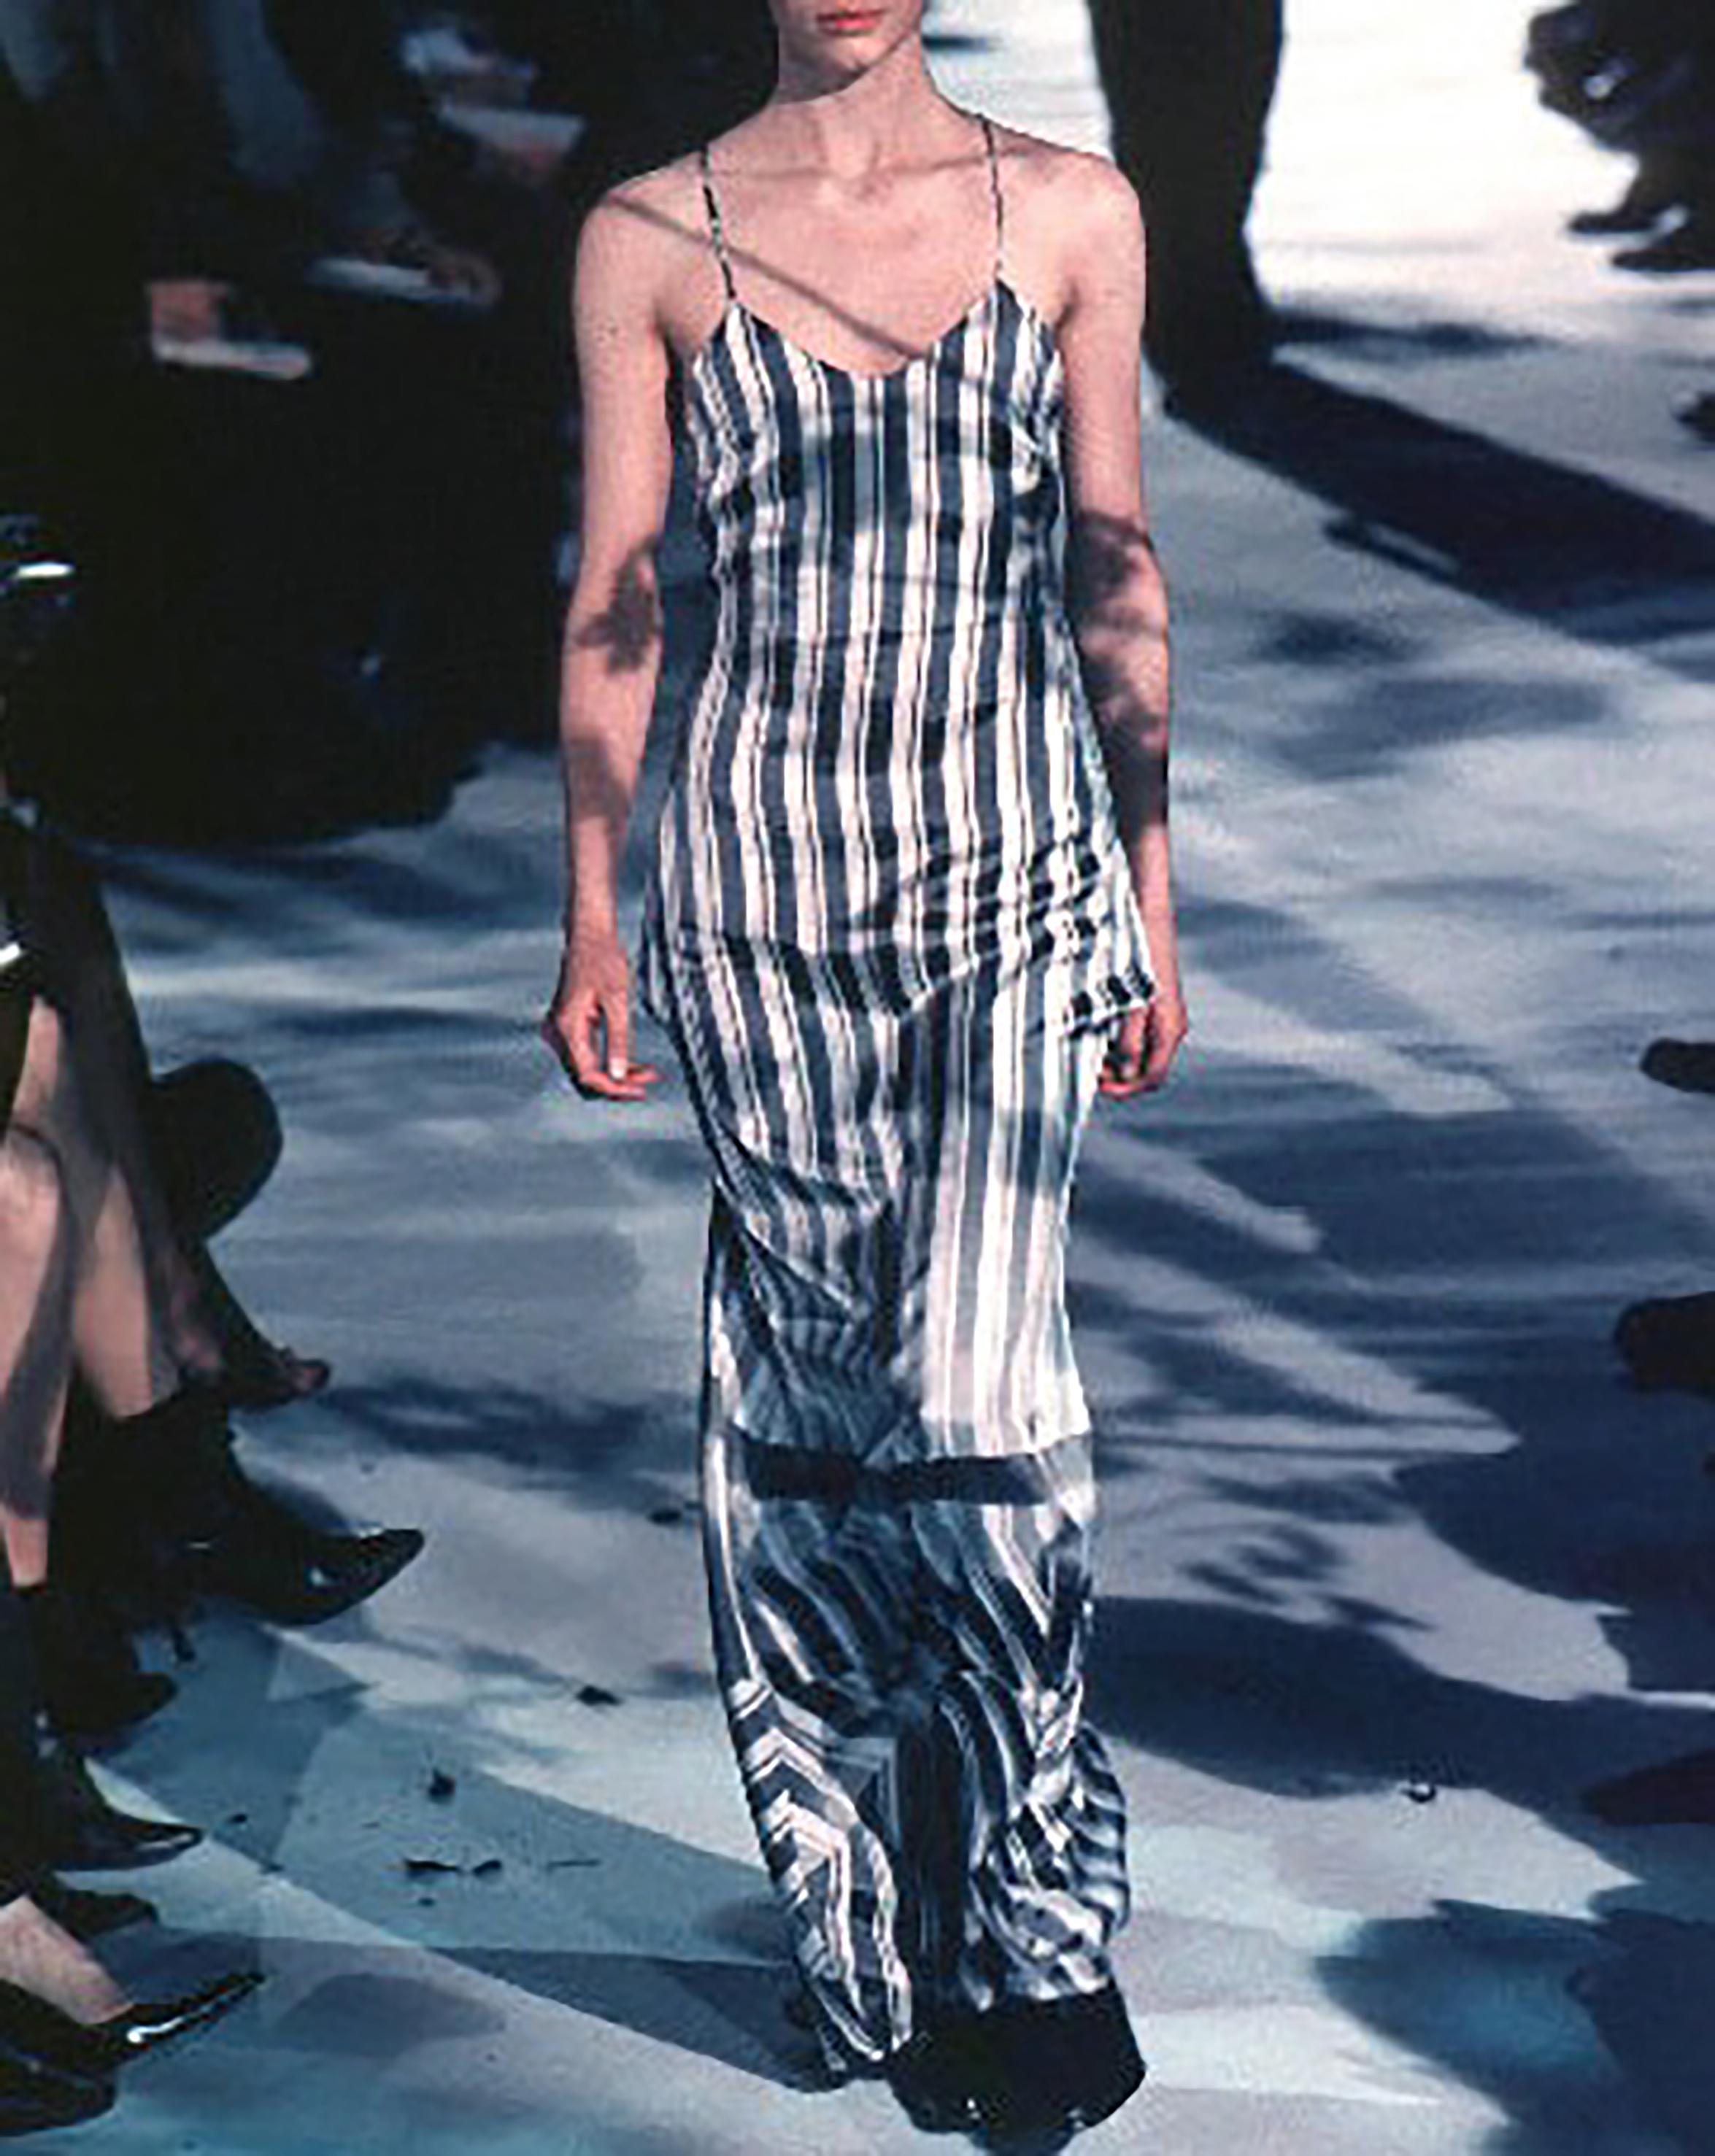 S/S 1999 Dries van Noten white and gray gradient stripe bustle gown. Spaghetti strap gown with long hem that can be buttoned into bustle. Cross-back straps and back zip closure. Bustle connects easily with built-in white button closures. As seen on